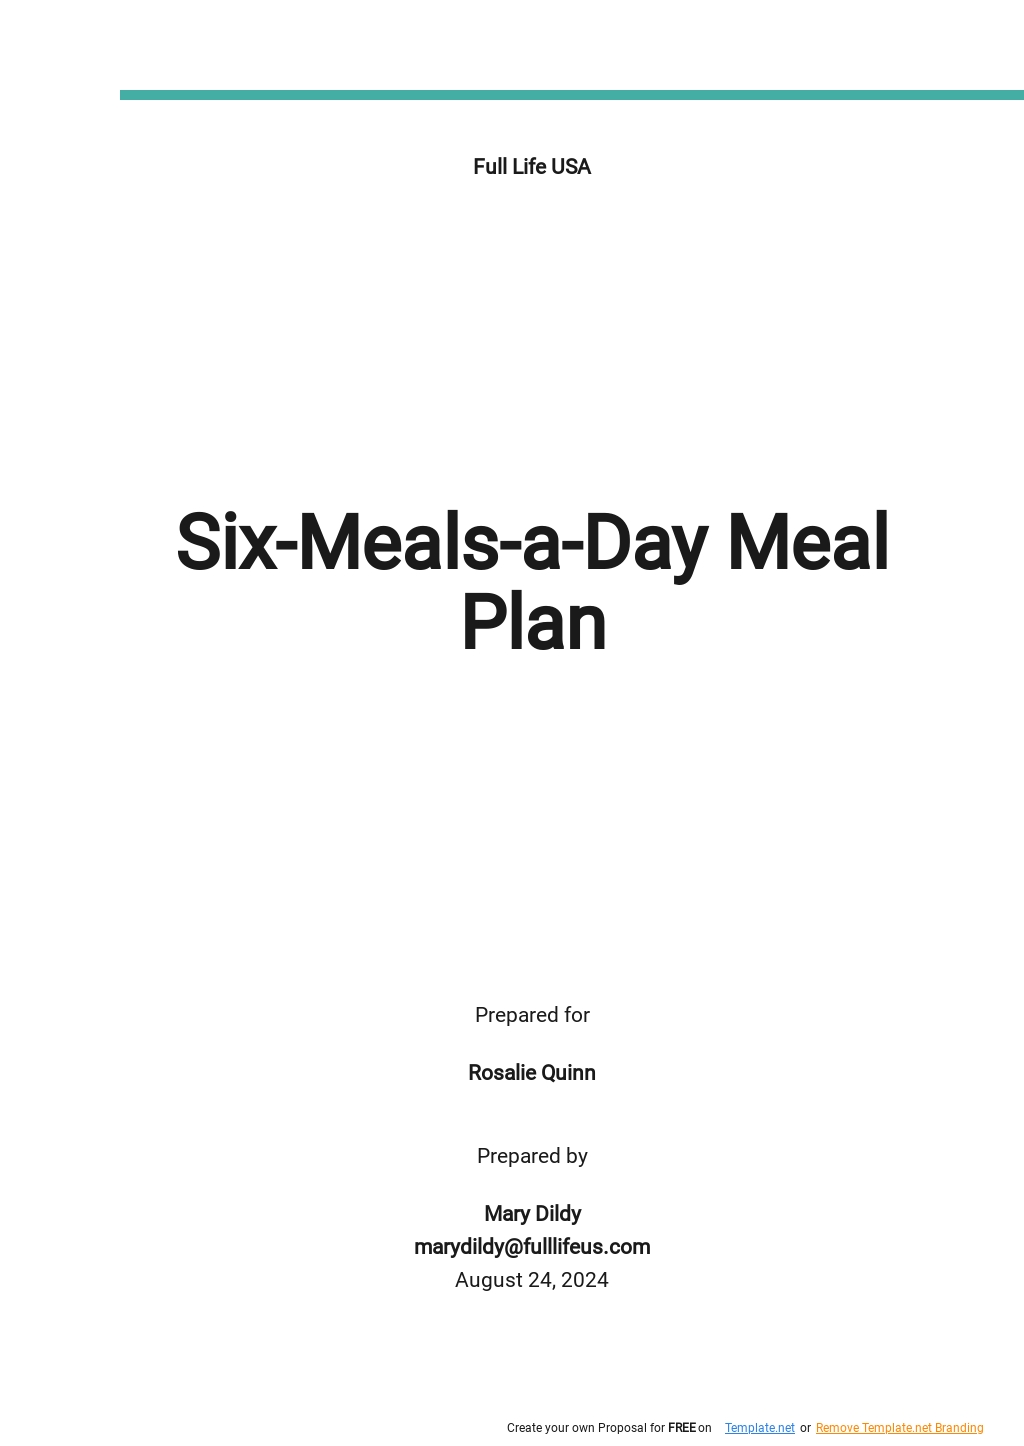 6 Meals A Day Meal Plan To Lose Weight Template.jpe